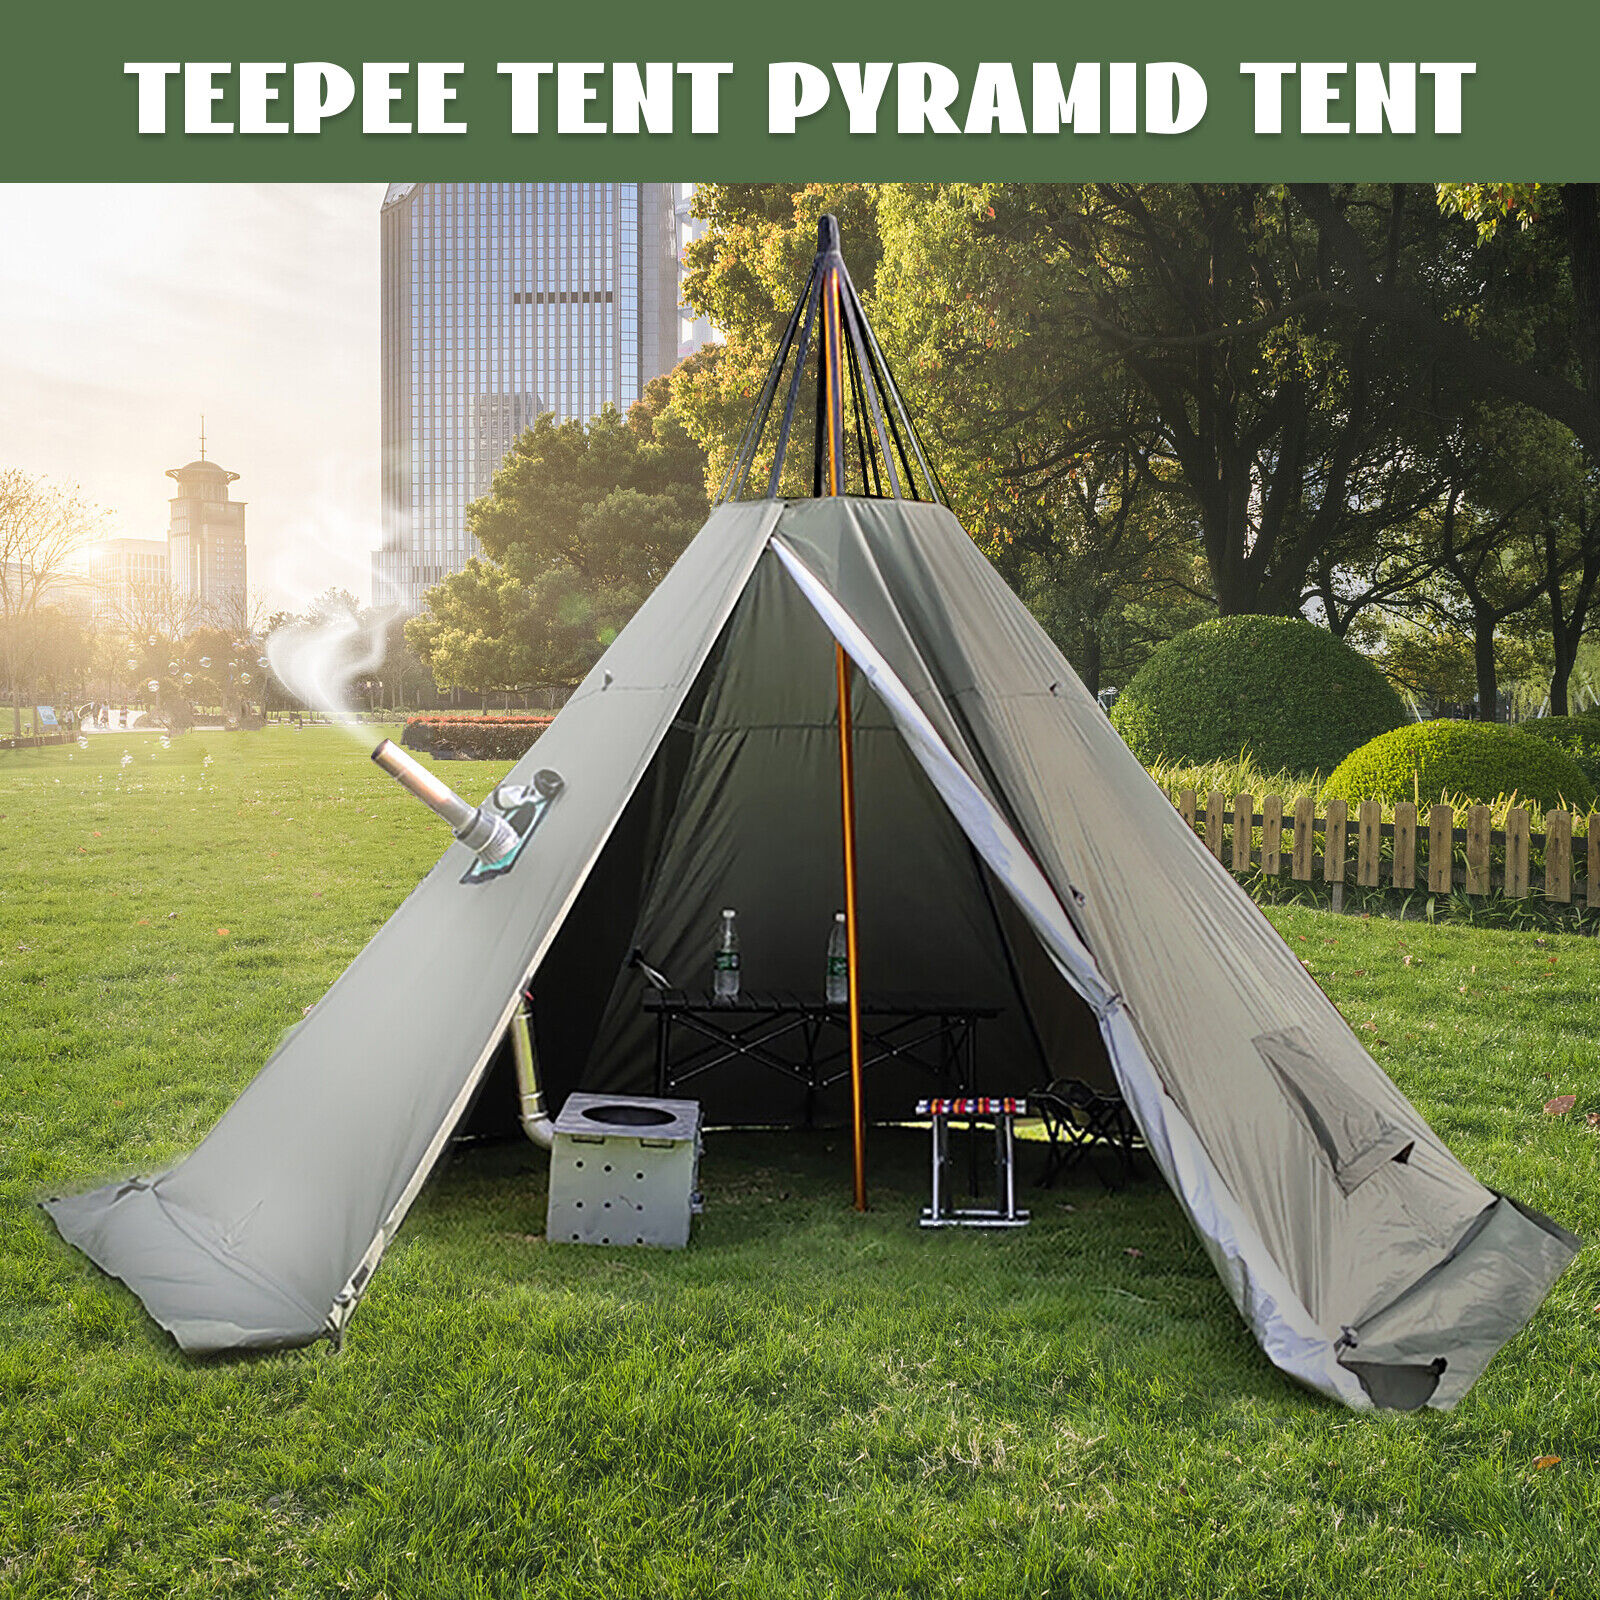 Camping Teepee Tent 2 Doors 4-Season Removable Top Cover Lightweight Outdoor 